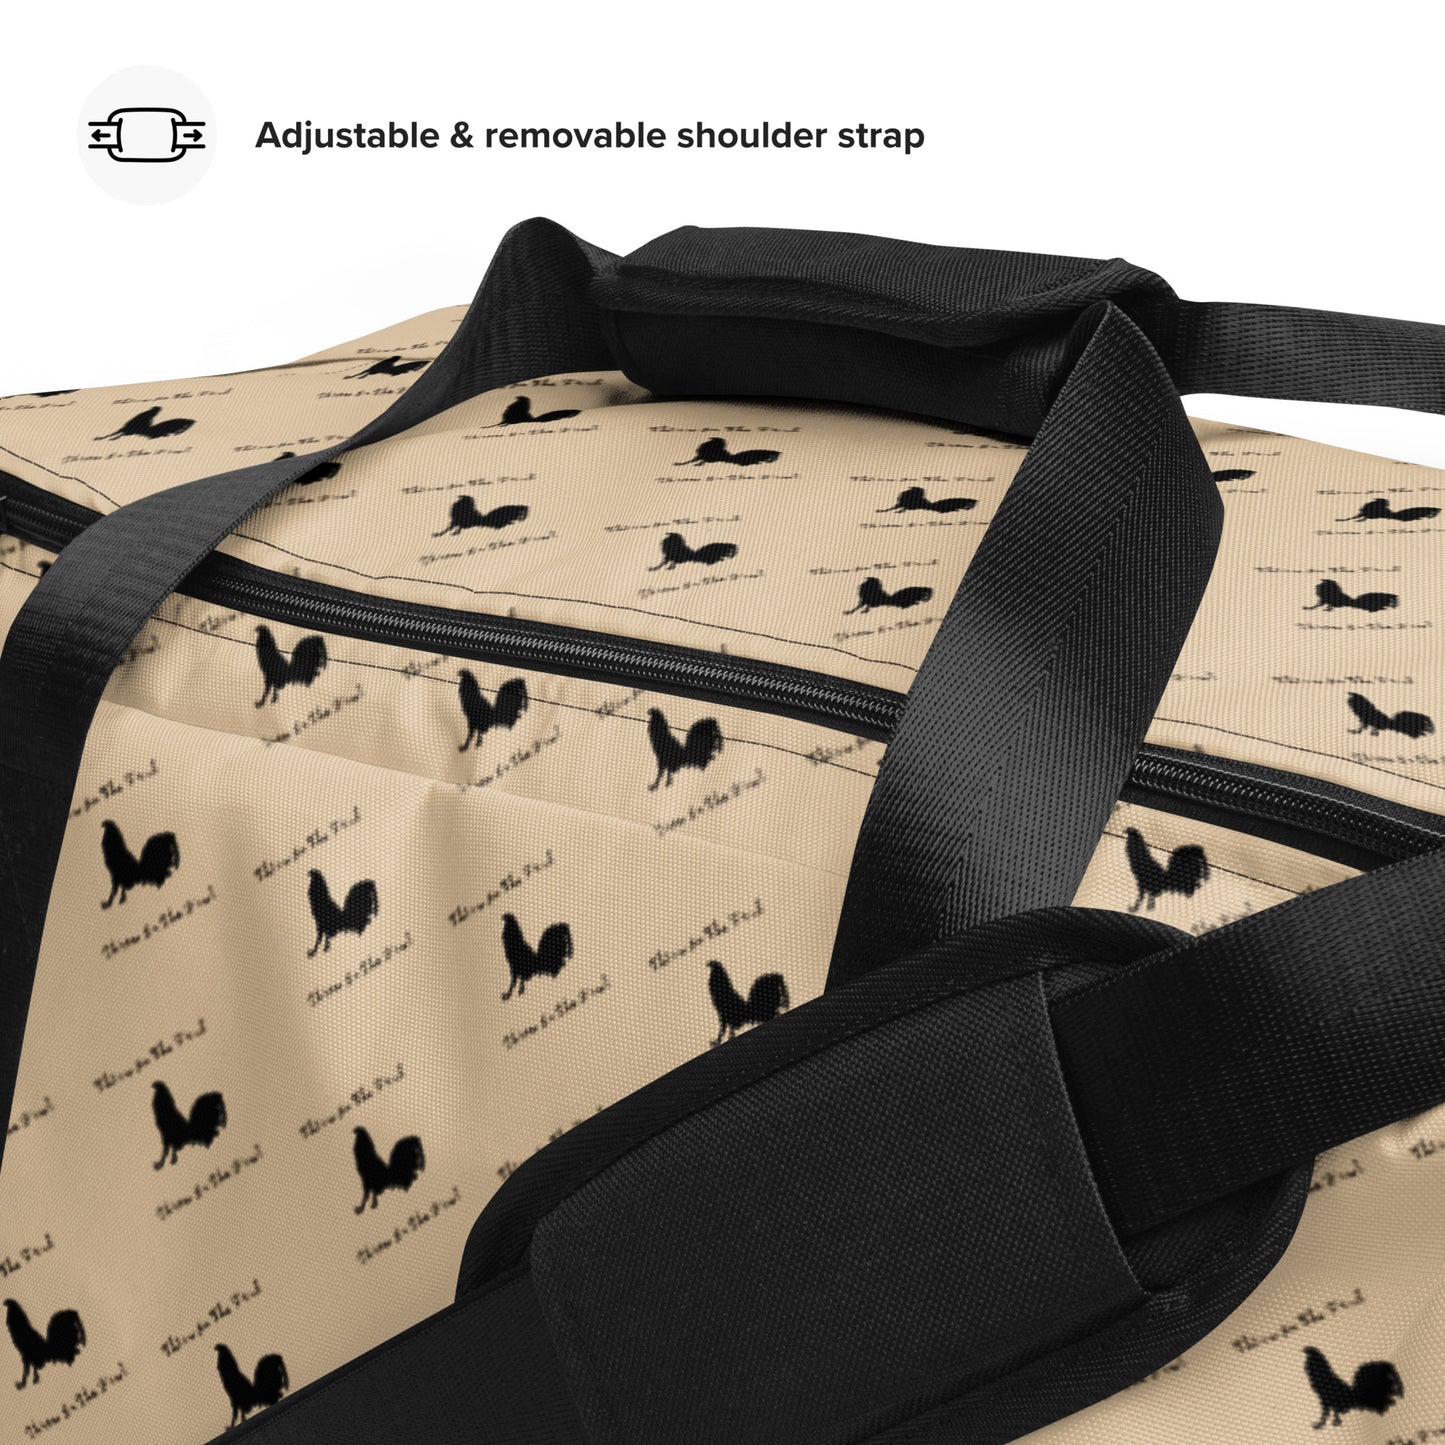 BLACK COCK TITF Champagne Gamefowl Rooster Duffle Bag